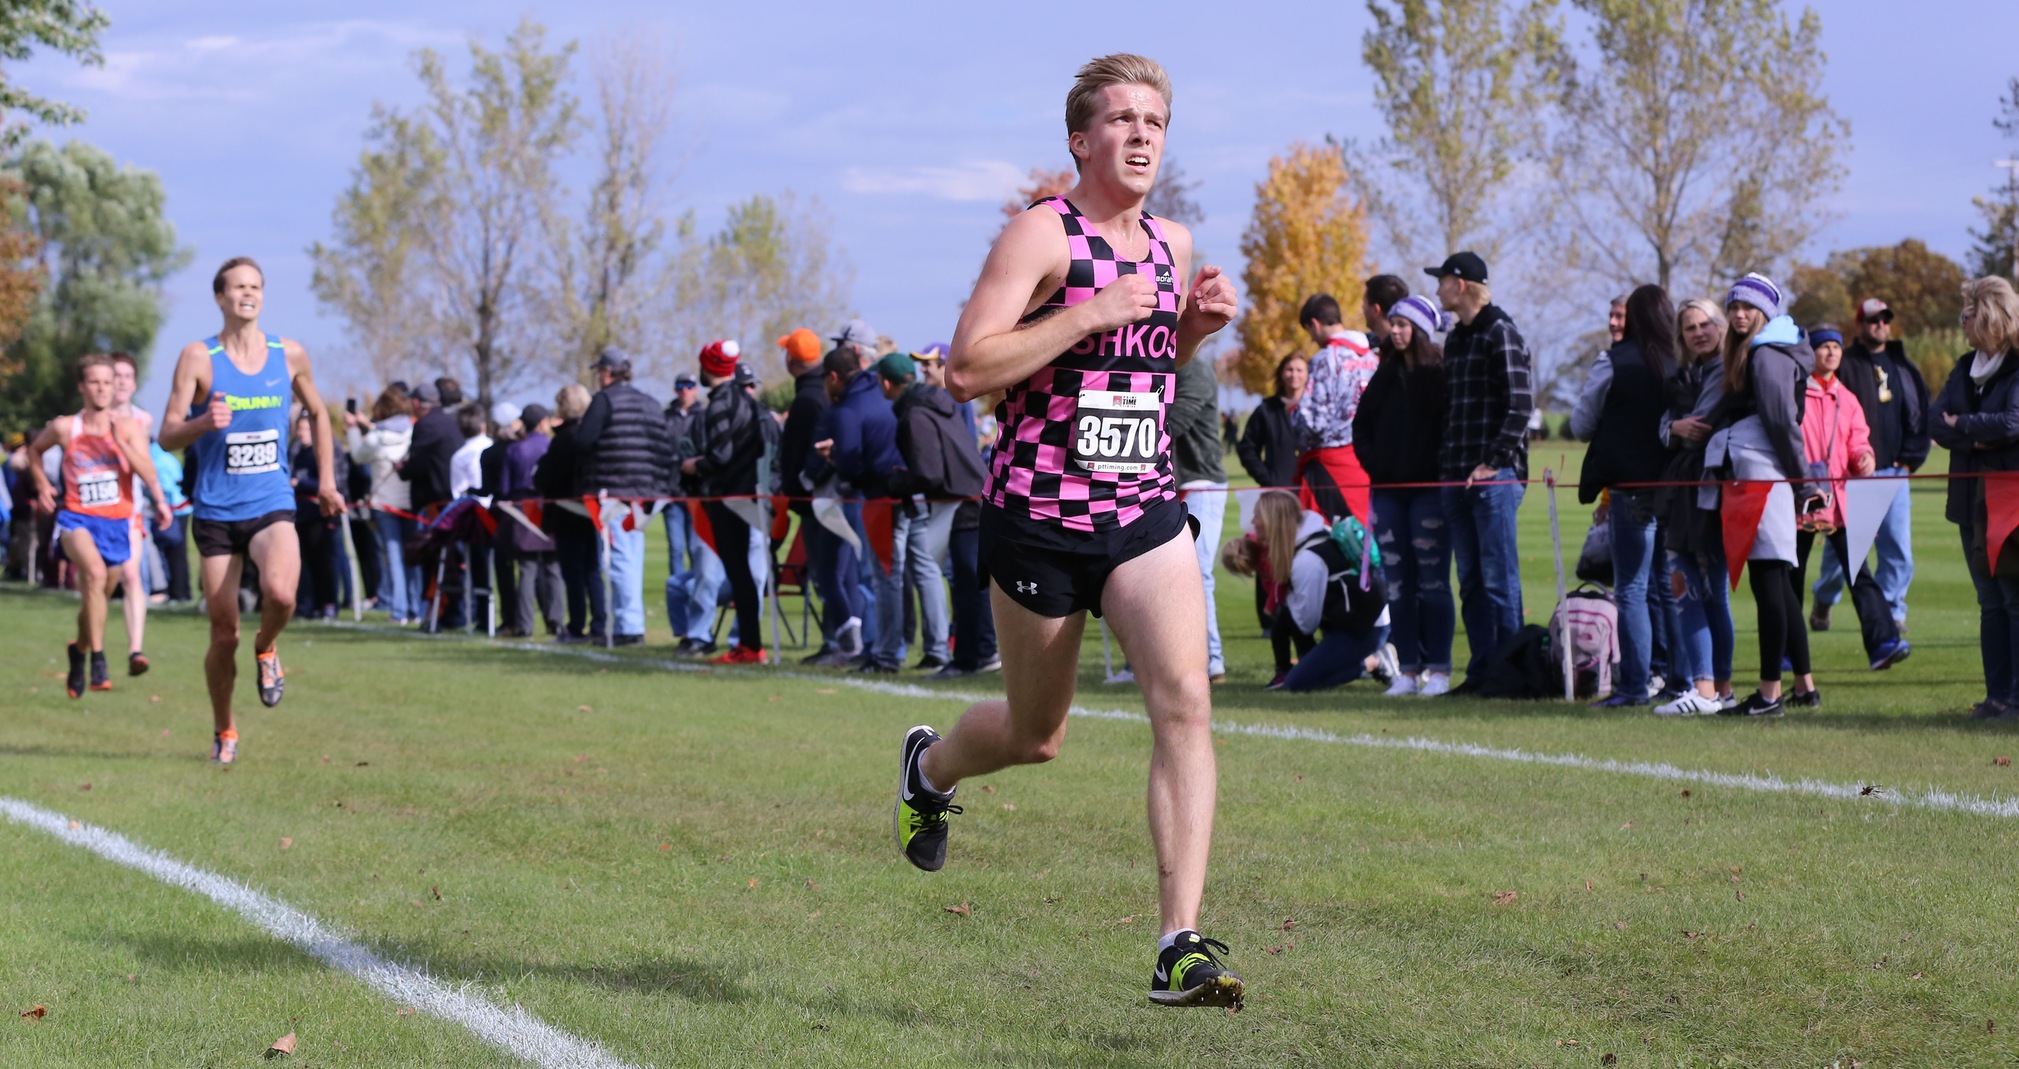 Andrew Rathkamp finished 61st among the 452 runners at the Kollege Town Sports Invitational.